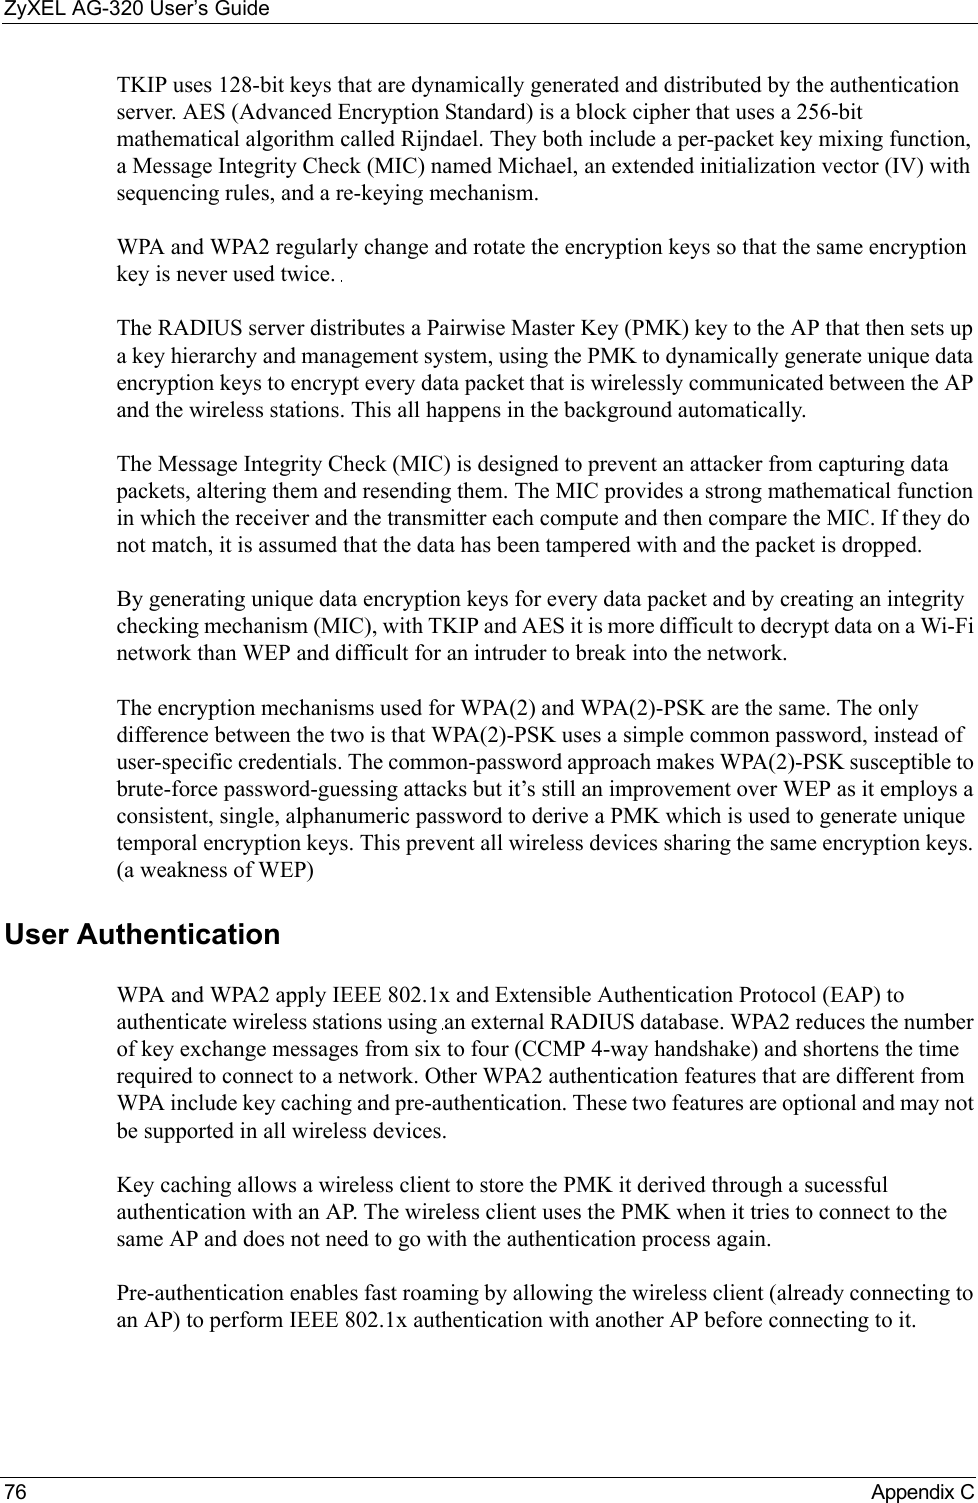 ZyXEL AG-320 User’s Guide76 Appendix CTKIP uses 128-bit keys that are dynamically generated and distributed by the authentication server. AES (Advanced Encryption Standard) is a block cipher that uses a 256-bit mathematical algorithm called Rijndael. They both include a per-packet key mixing function, a Message Integrity Check (MIC) named Michael, an extended initialization vector (IV) with sequencing rules, and a re-keying mechanism.WPA and WPA2 regularly change and rotate the encryption keys so that the same encryption key is never used twice. The RADIUS server distributes a Pairwise Master Key (PMK) key to the AP that then sets up a key hierarchy and management system, using the PMK to dynamically generate unique data encryption keys to encrypt every data packet that is wirelessly communicated between the AP and the wireless stations. This all happens in the background automatically.The Message Integrity Check (MIC) is designed to prevent an attacker from capturing data packets, altering them and resending them. The MIC provides a strong mathematical function in which the receiver and the transmitter each compute and then compare the MIC. If they do not match, it is assumed that the data has been tampered with and the packet is dropped. By generating unique data encryption keys for every data packet and by creating an integrity checking mechanism (MIC), with TKIP and AES it is more difficult to decrypt data on a Wi-Fi network than WEP and difficult for an intruder to break into the network. The encryption mechanisms used for WPA(2) and WPA(2)-PSK are the same. The only difference between the two is that WPA(2)-PSK uses a simple common password, instead of user-specific credentials. The common-password approach makes WPA(2)-PSK susceptible to brute-force password-guessing attacks but it’s still an improvement over WEP as it employs a consistent, single, alphanumeric password to derive a PMK which is used to generate unique temporal encryption keys. This prevent all wireless devices sharing the same encryption keys. (a weakness of WEP)User Authentication WPA and WPA2 apply IEEE 802.1x and Extensible Authentication Protocol (EAP) to authenticate wireless stations using an external RADIUS database. WPA2 reduces the number of key exchange messages from six to four (CCMP 4-way handshake) and shortens the time required to connect to a network. Other WPA2 authentication features that are different from WPA include key caching and pre-authentication. These two features are optional and may not be supported in all wireless devices.Key caching allows a wireless client to store the PMK it derived through a sucessful authentication with an AP. The wireless client uses the PMK when it tries to connect to the same AP and does not need to go with the authentication process again.Pre-authentication enables fast roaming by allowing the wireless client (already connecting to an AP) to perform IEEE 802.1x authentication with another AP before connecting to it.